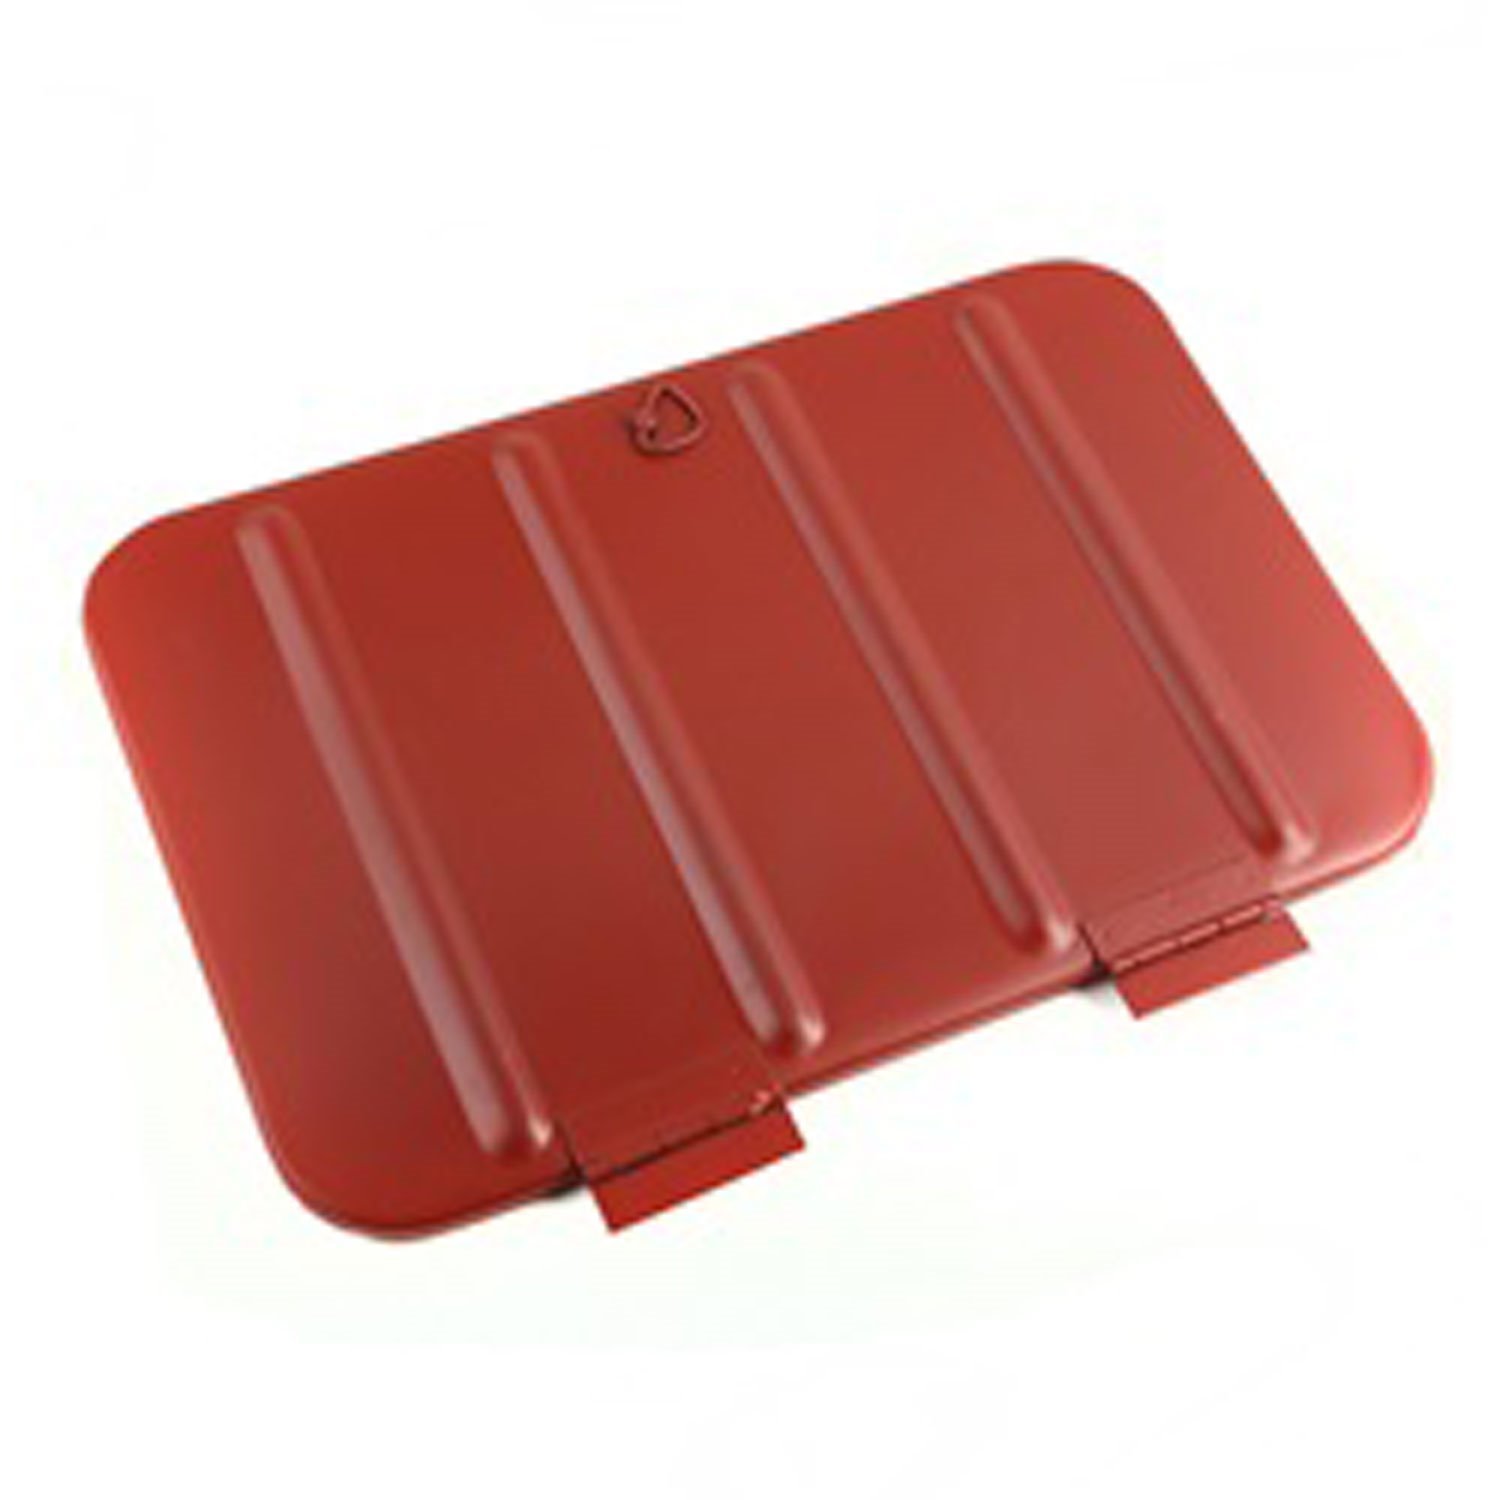 This reproduction tool box compartment lid from Omix-ADA fits 46-71 Willys and Jeep models.